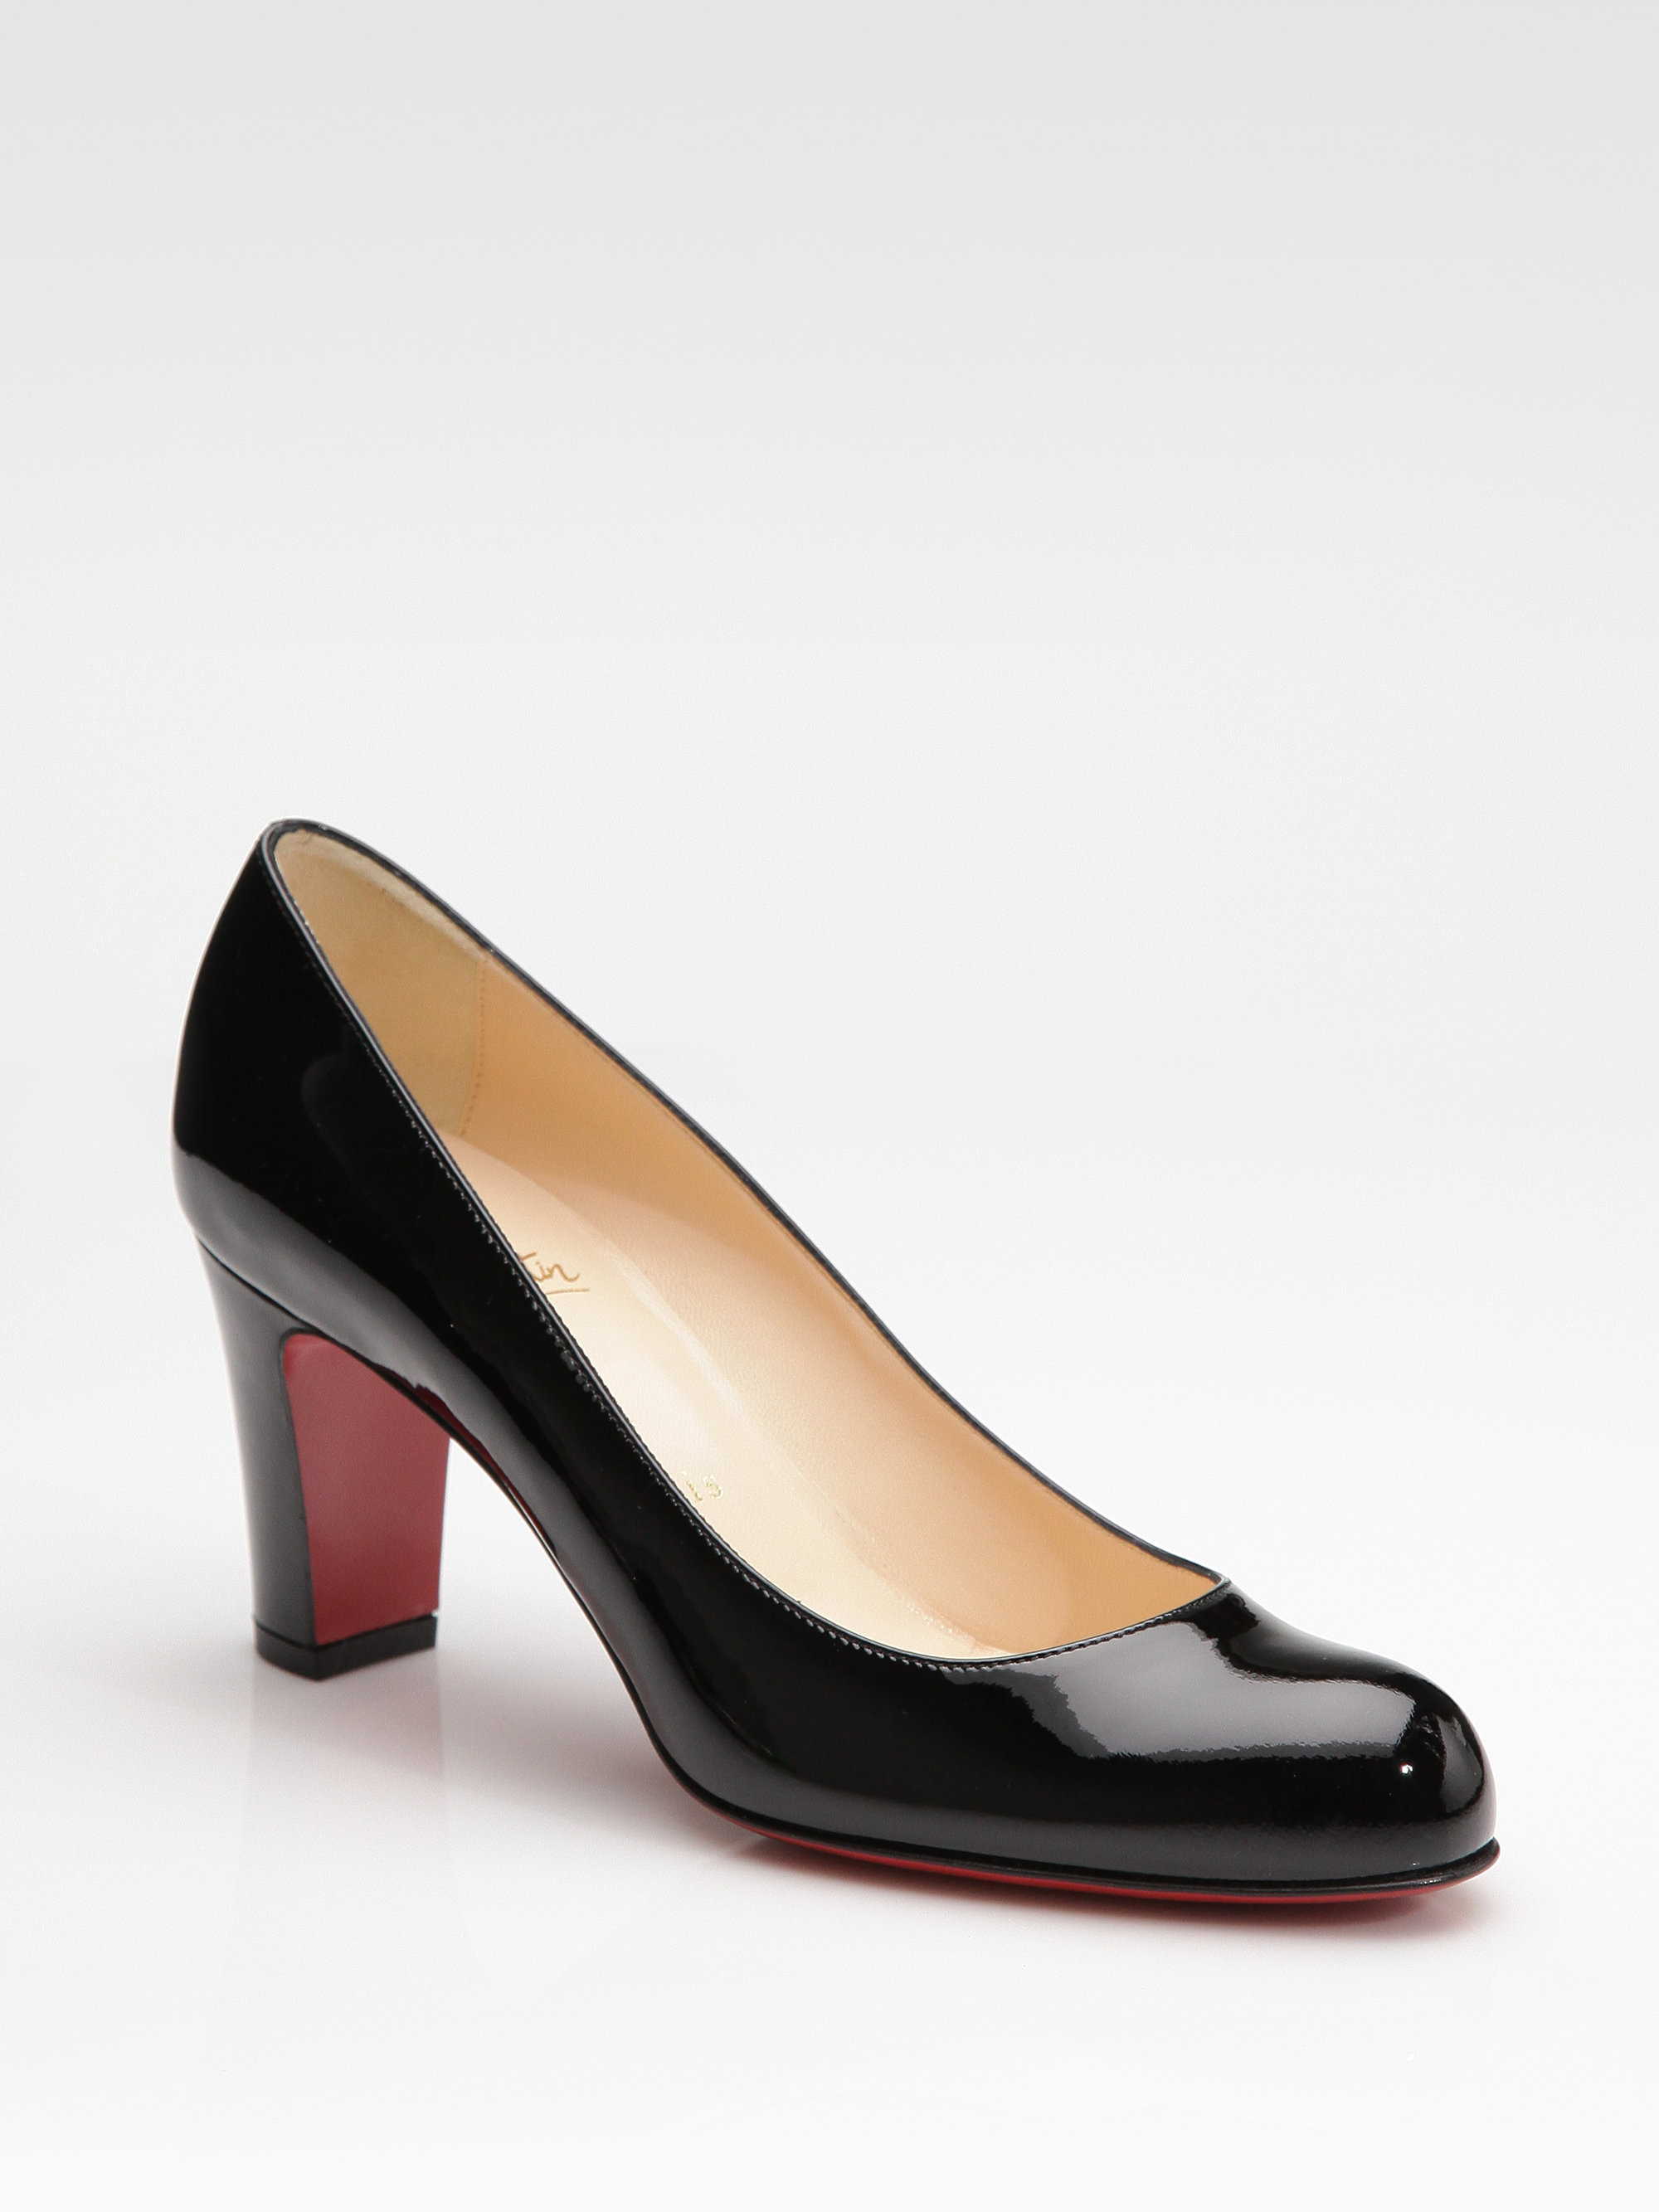 Christian louboutin Miss Tack Patent Leather Pumps in Black | Lyst